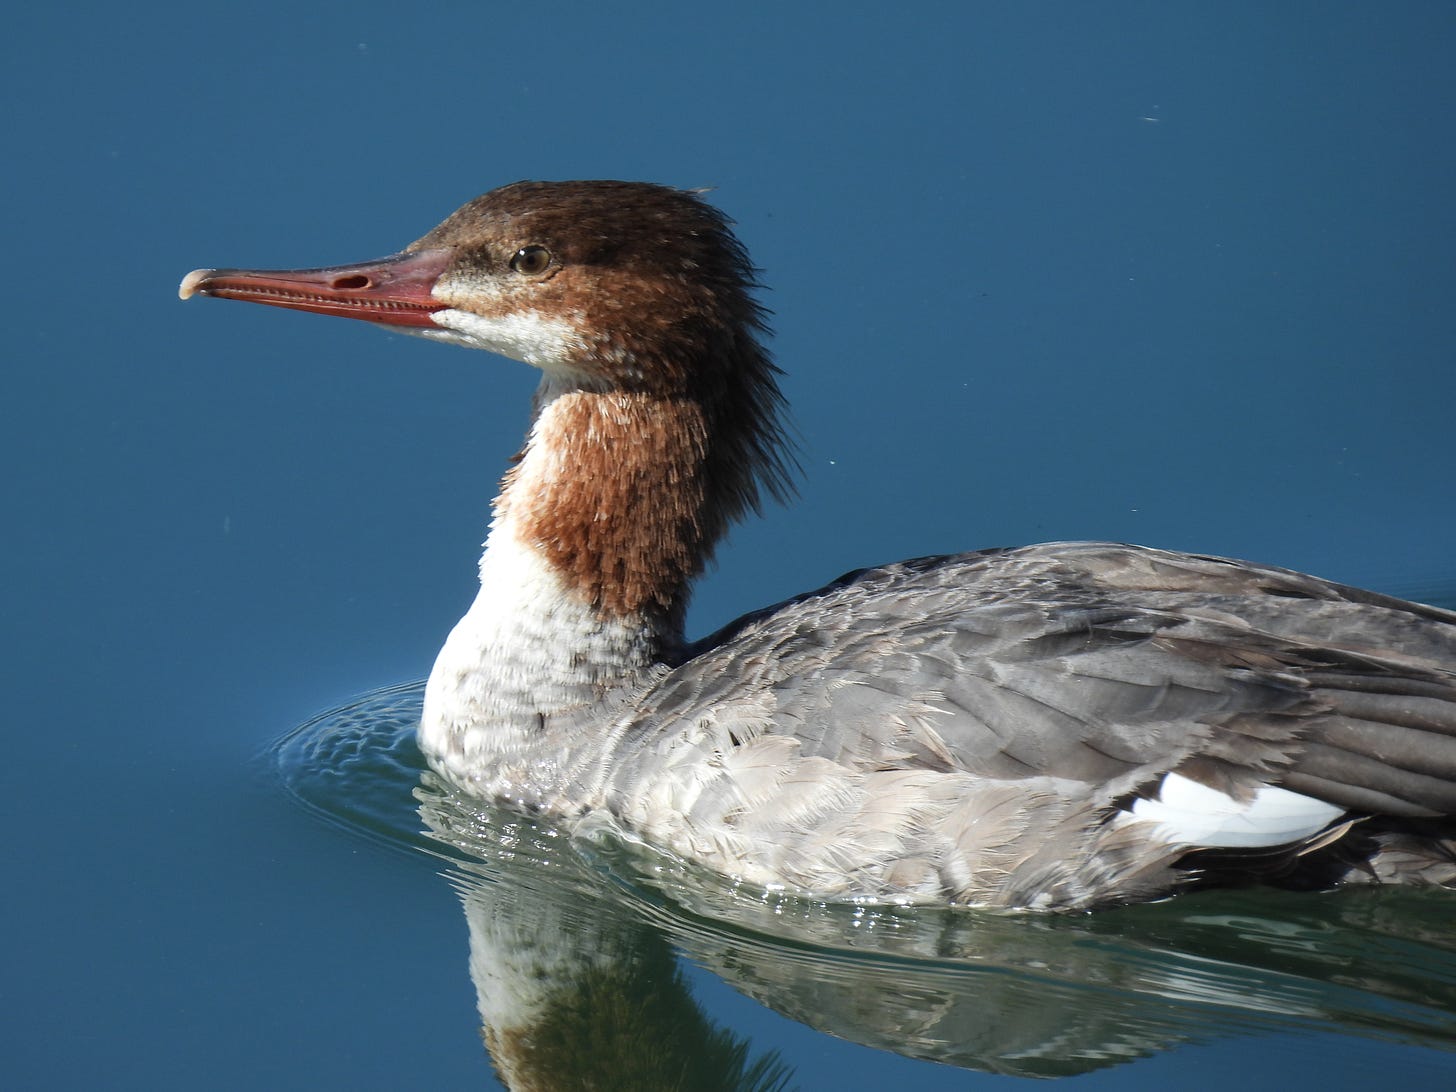 A spectacular waterbird with a gray body, a bright rusty head and a long, narrow beak. She is moving through beautiful, gently rippling water, going from right to left.